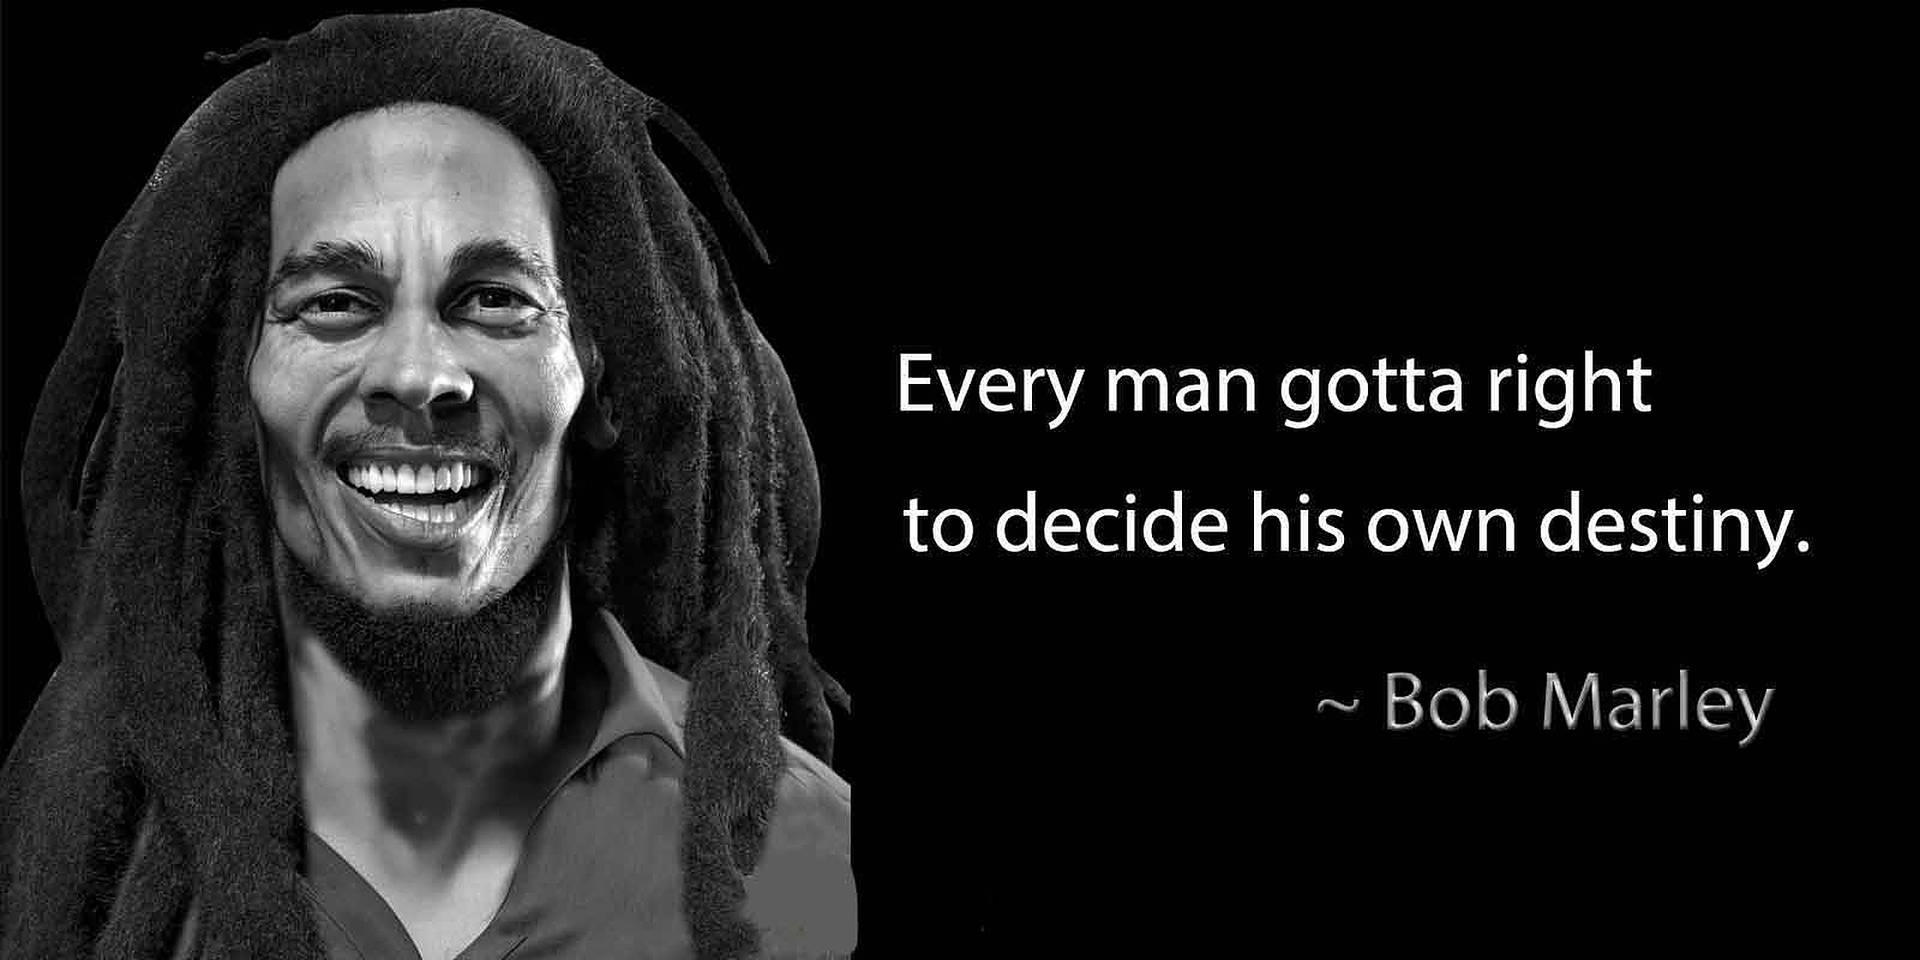 Bob Marley Quotes About Destiny